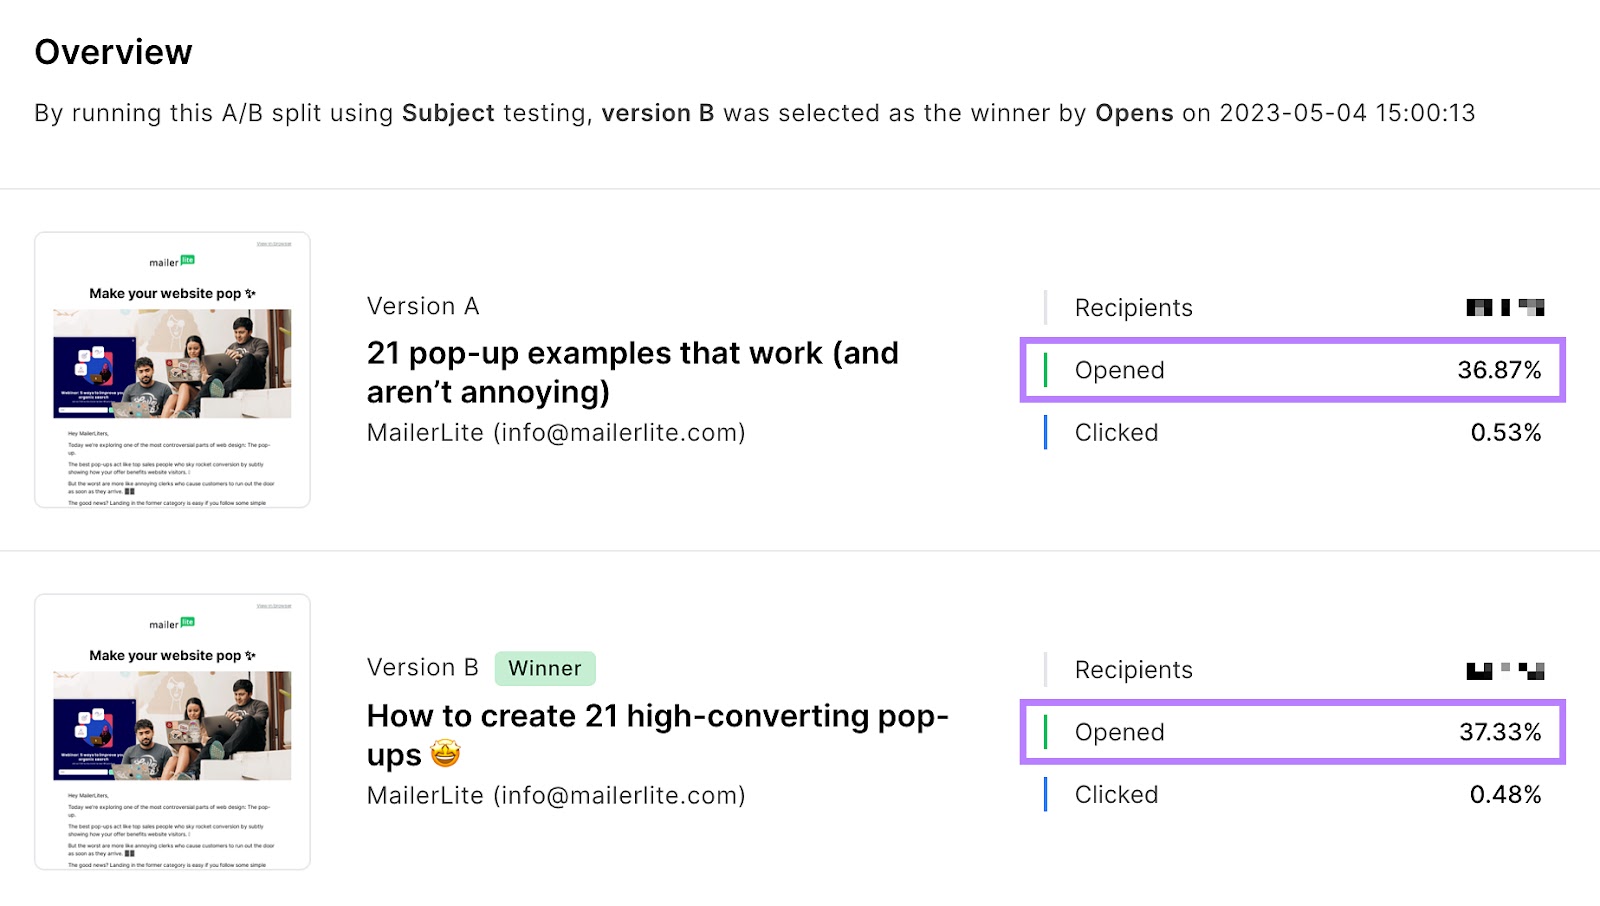 MailerLite's "Overview" section showing two emails with different subject lines.